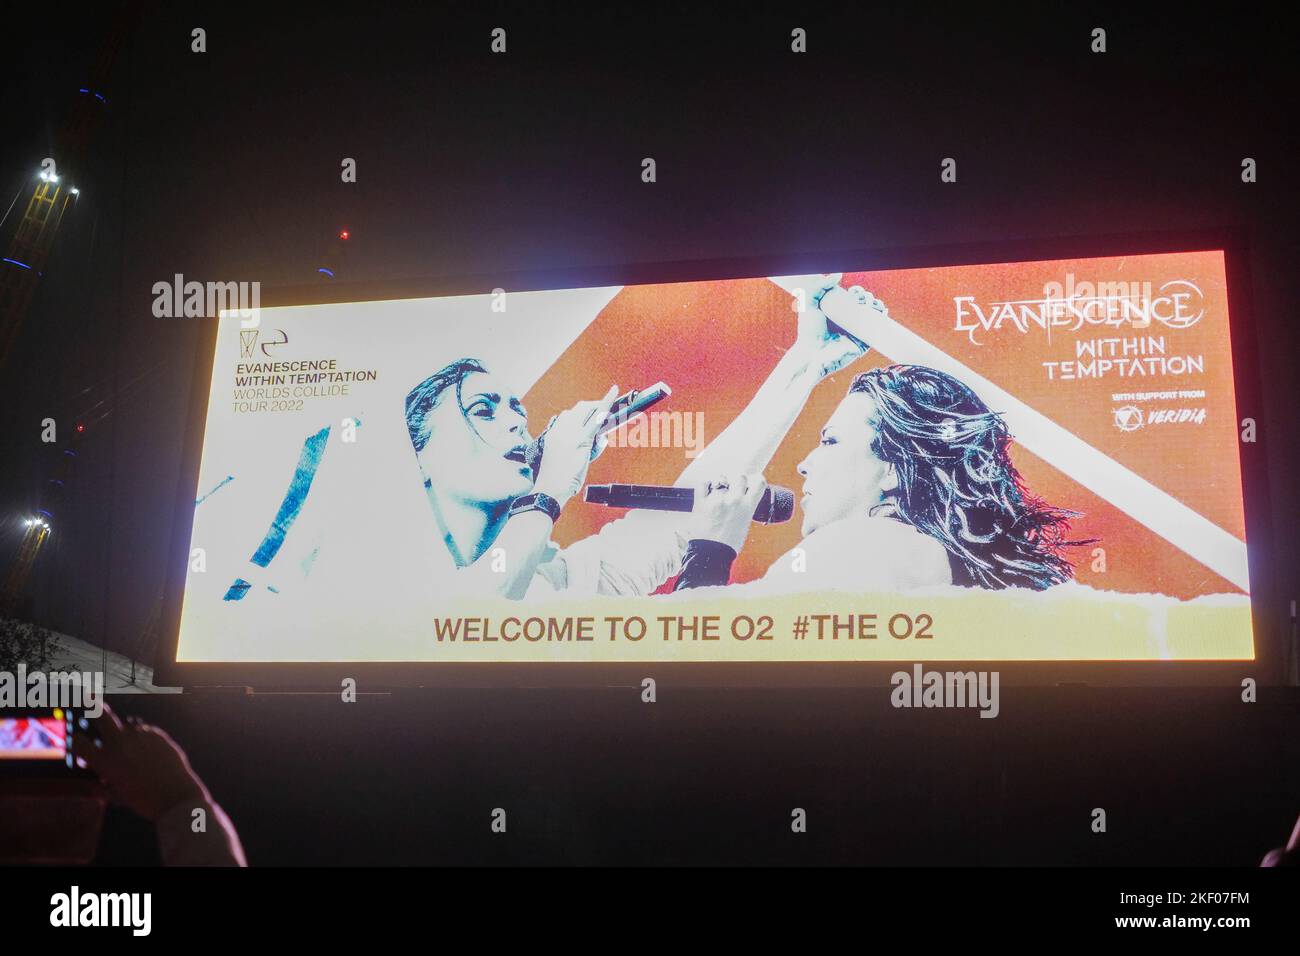 Billboard at the O2, advertising Within Temptation and Evanescence - World Collides Tour. Stock Photo